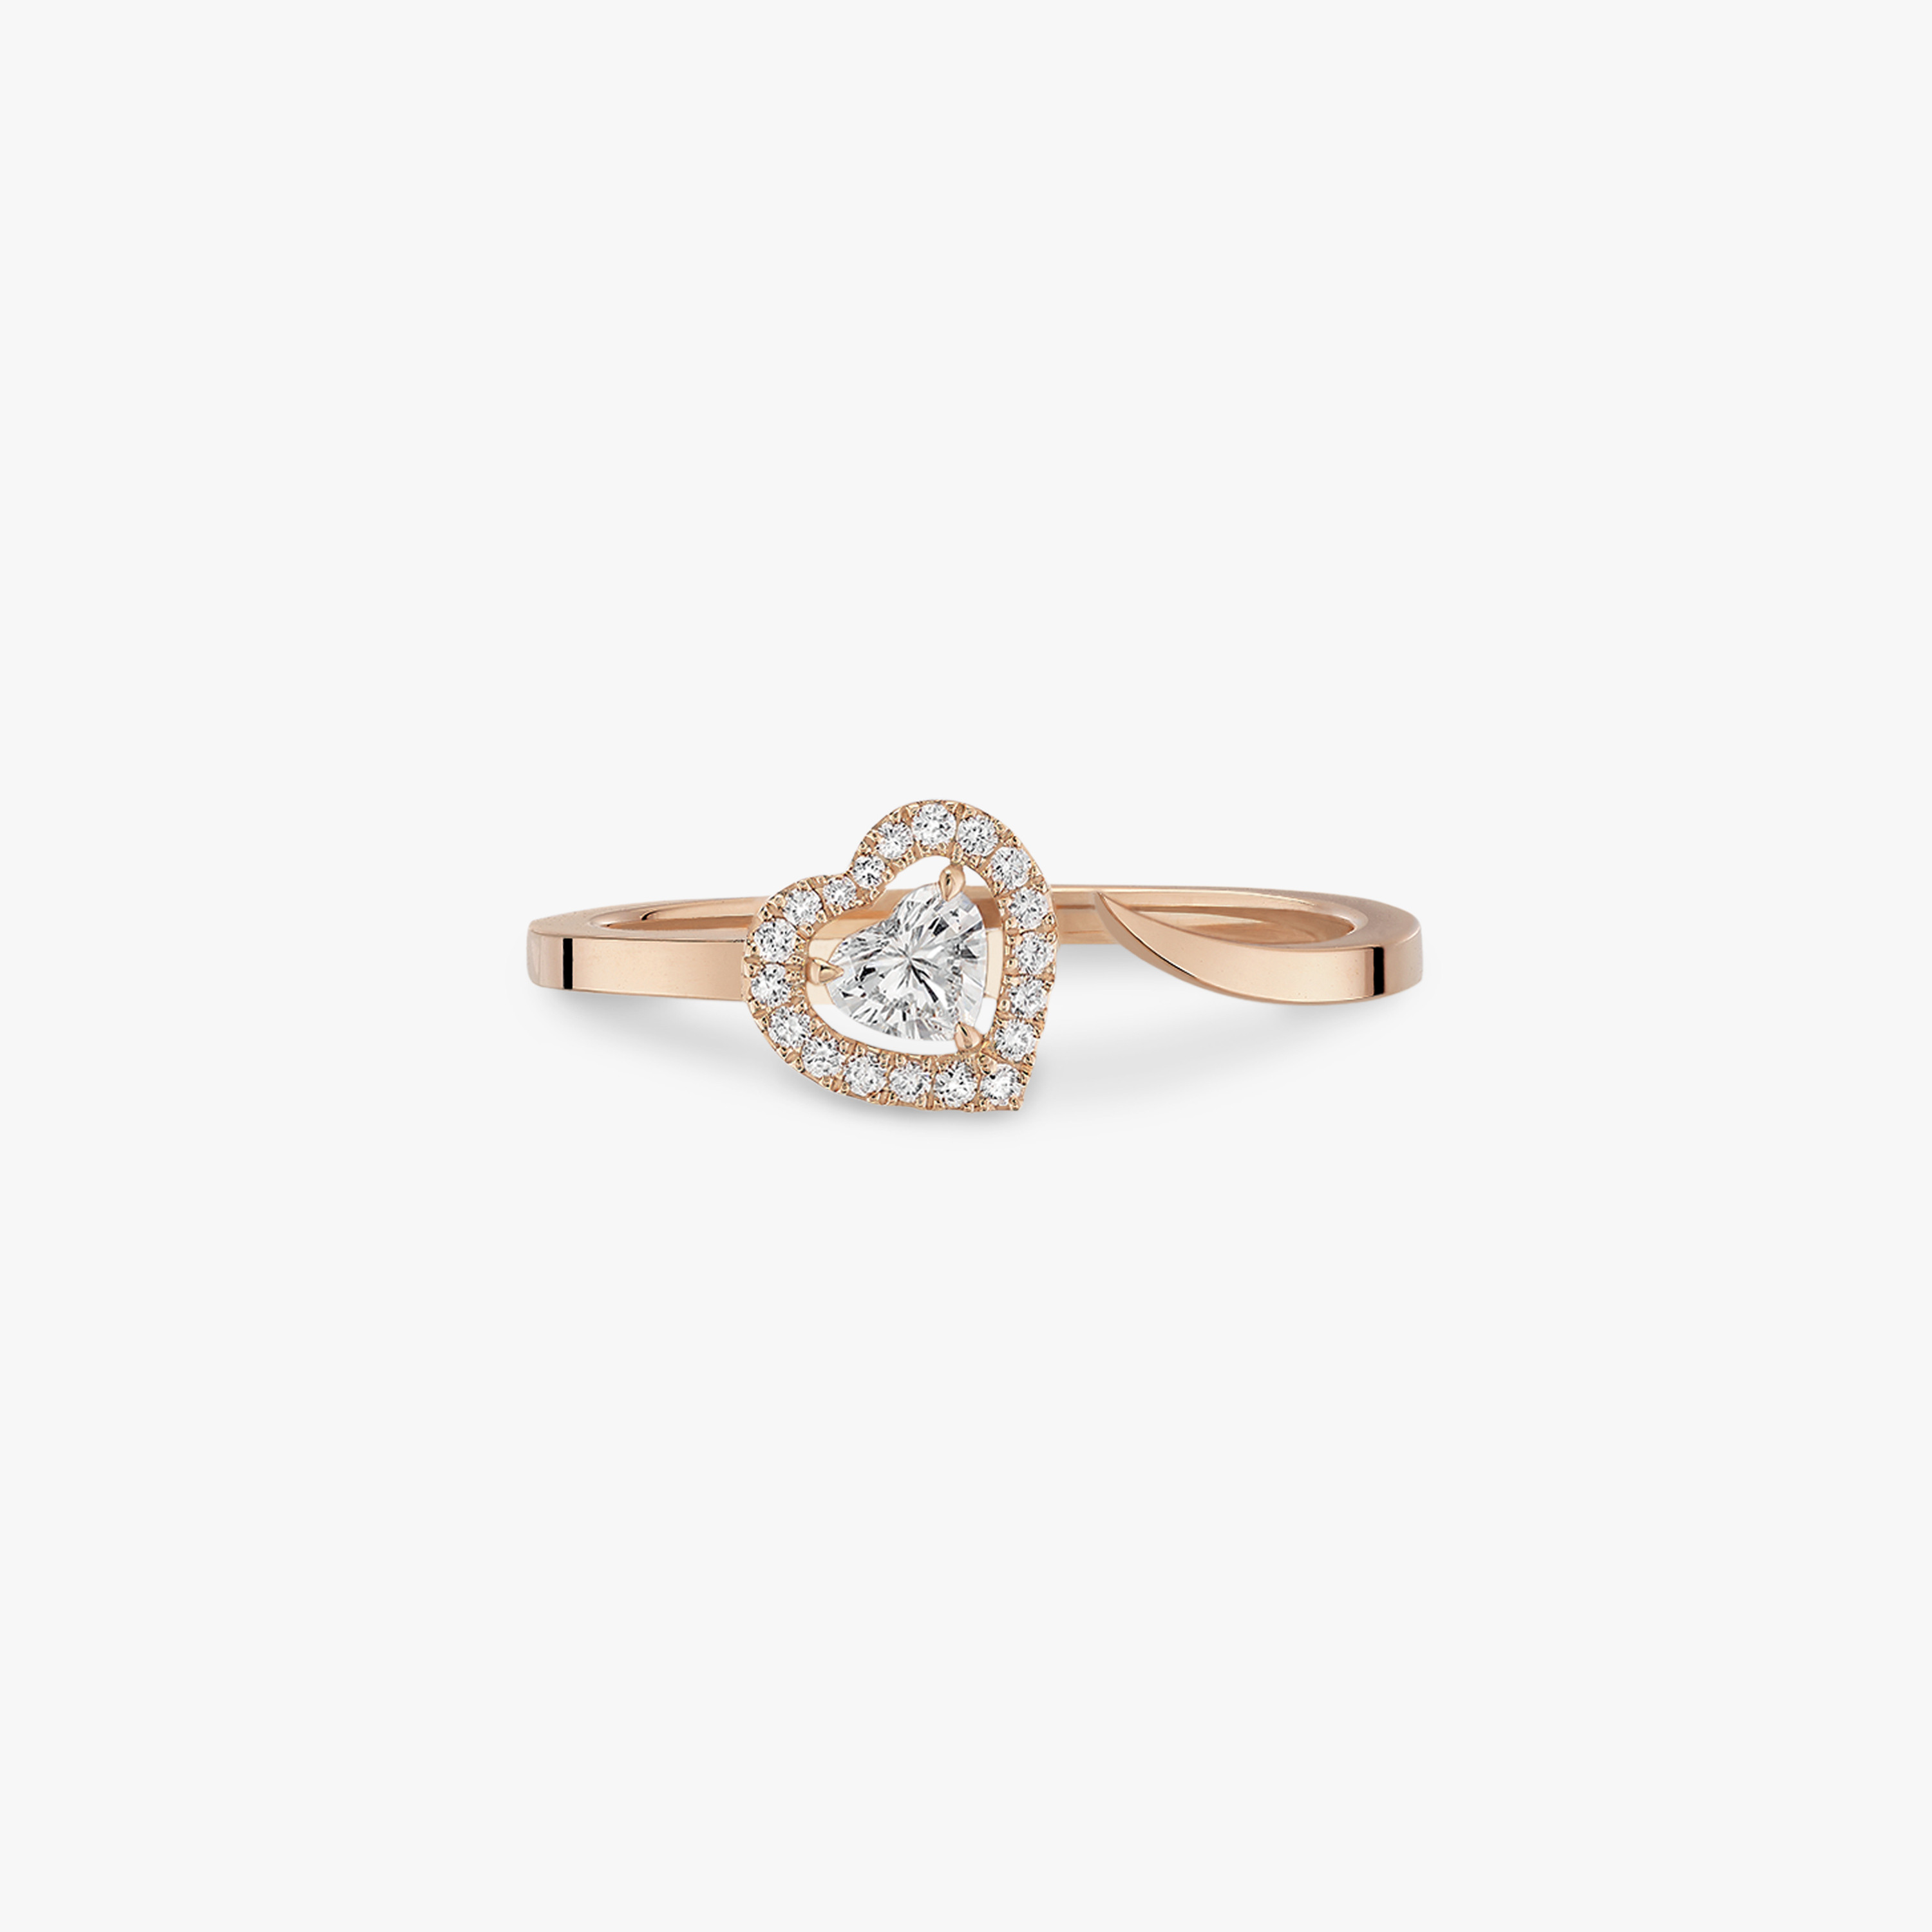 Joy Coeur ring in pink gold by Messika